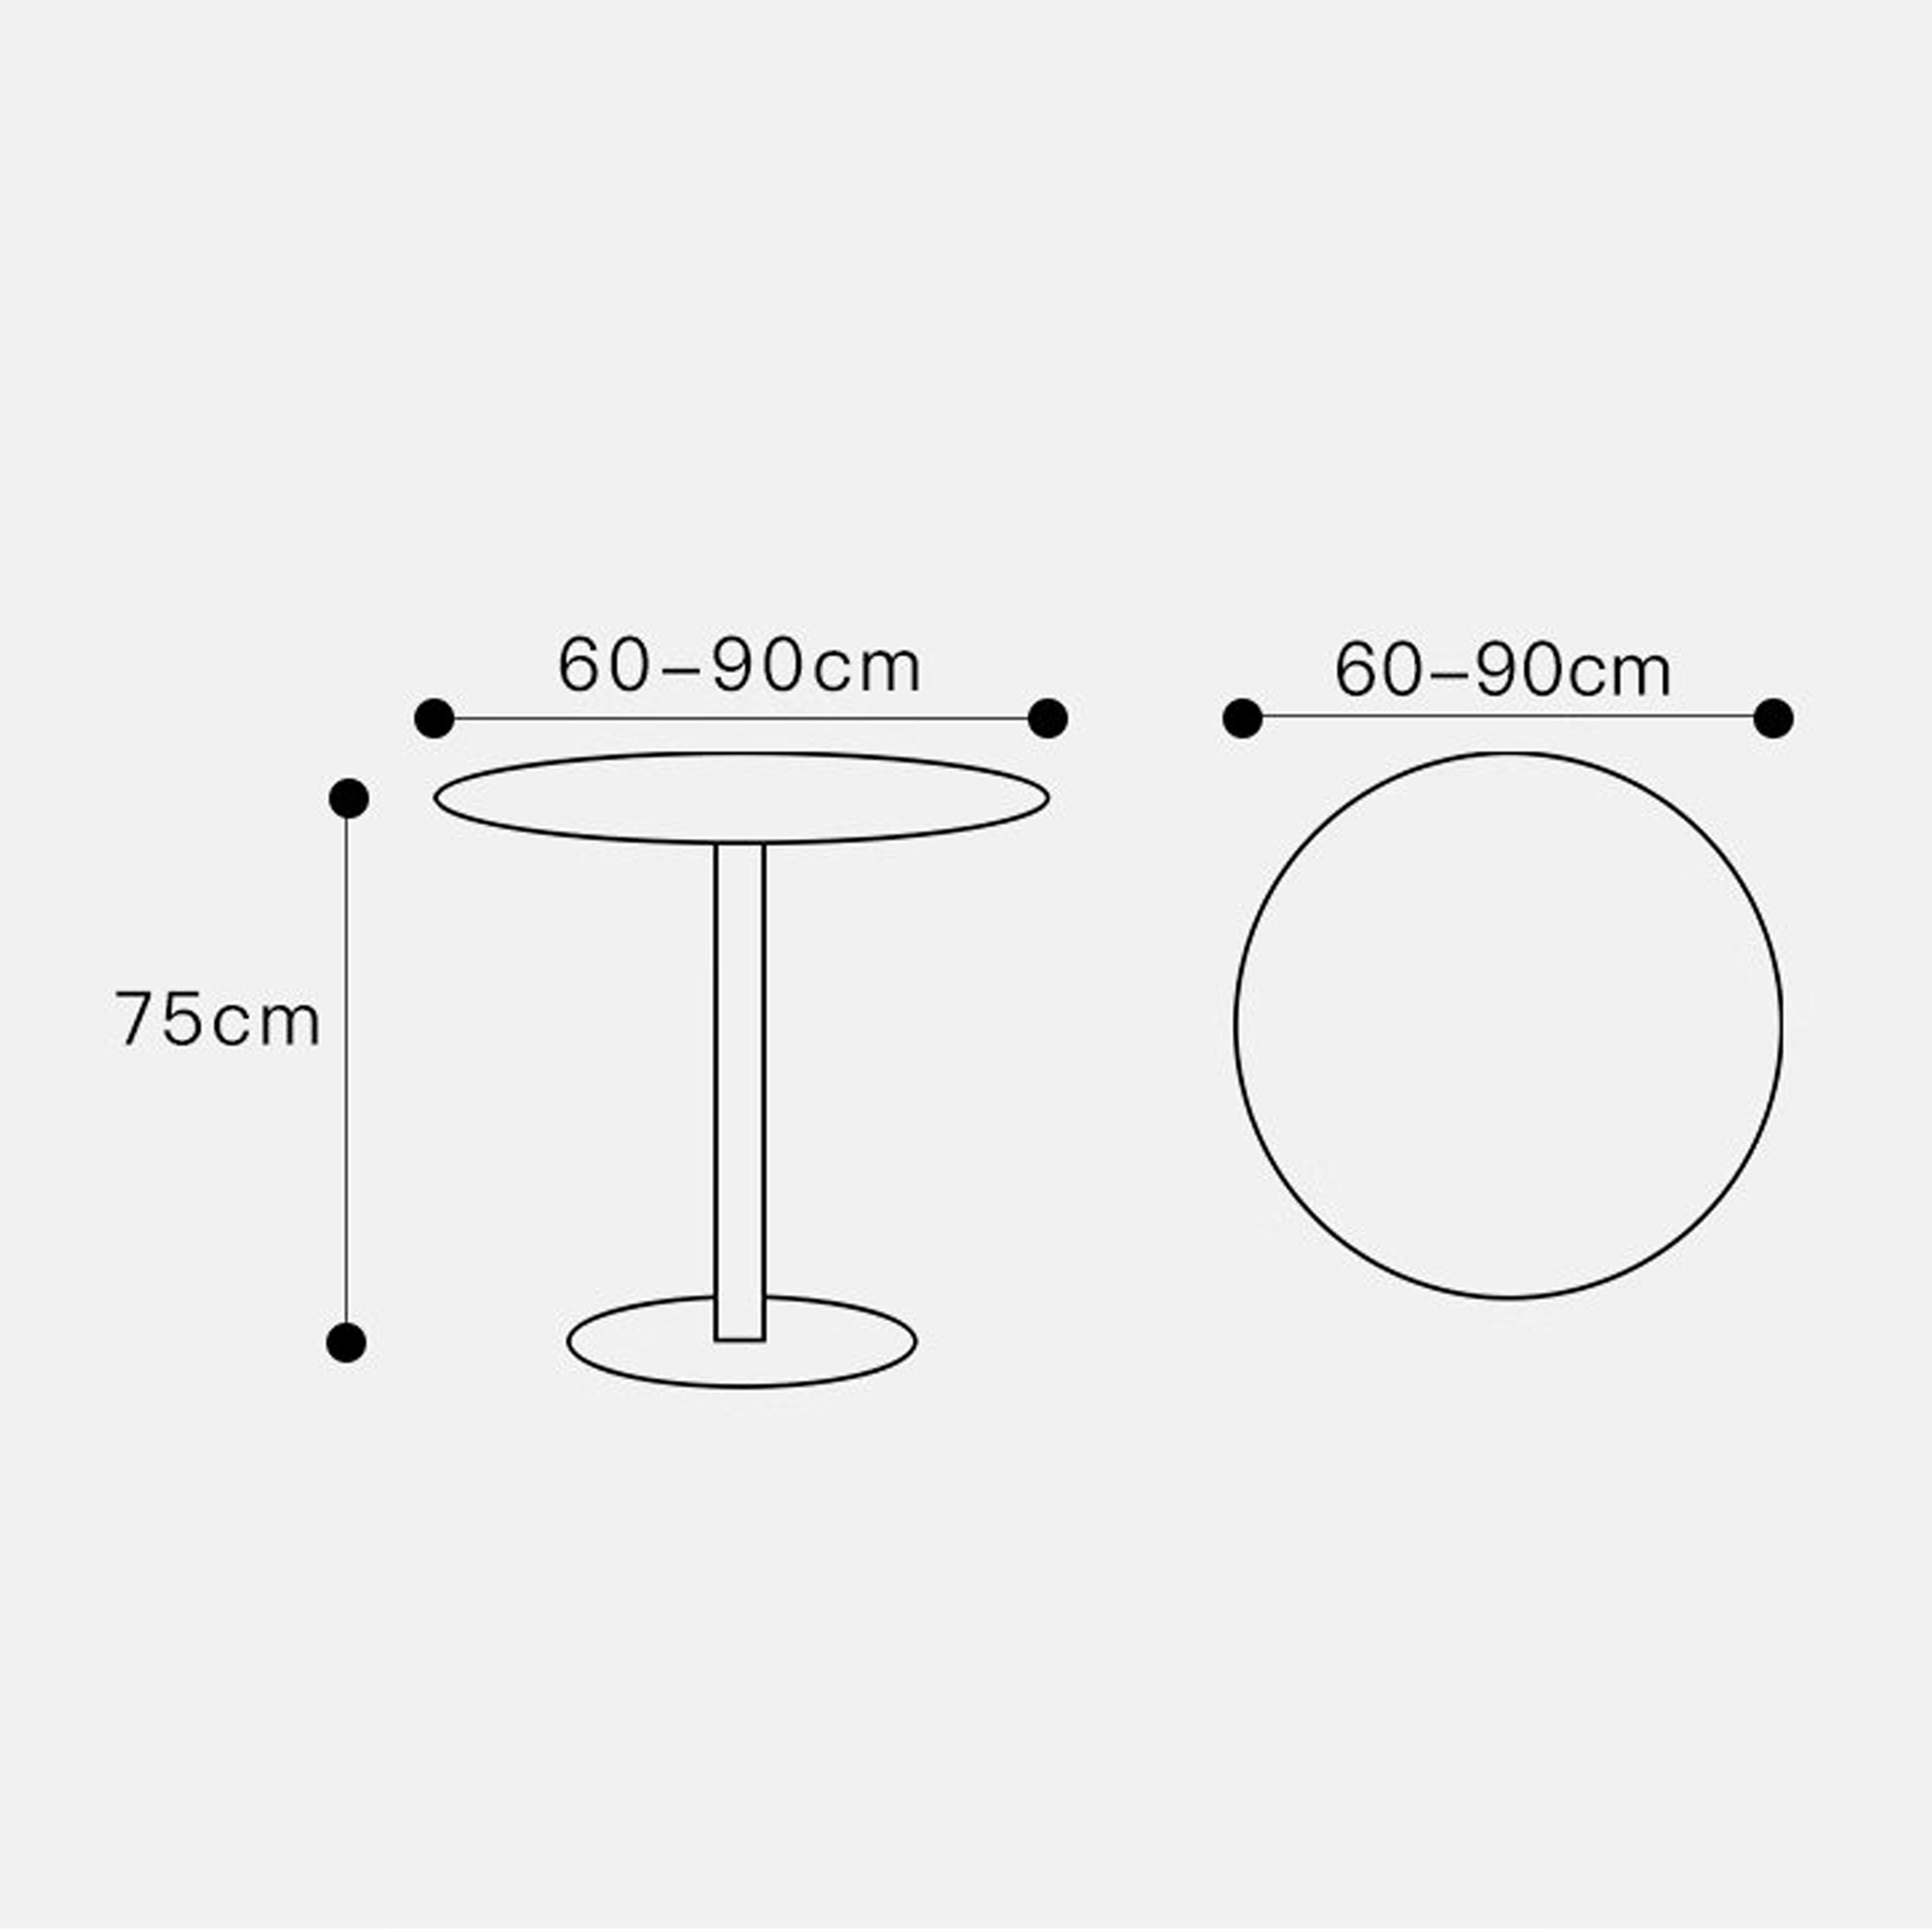 9.0 Table - Sintered Stone Round Dining Table